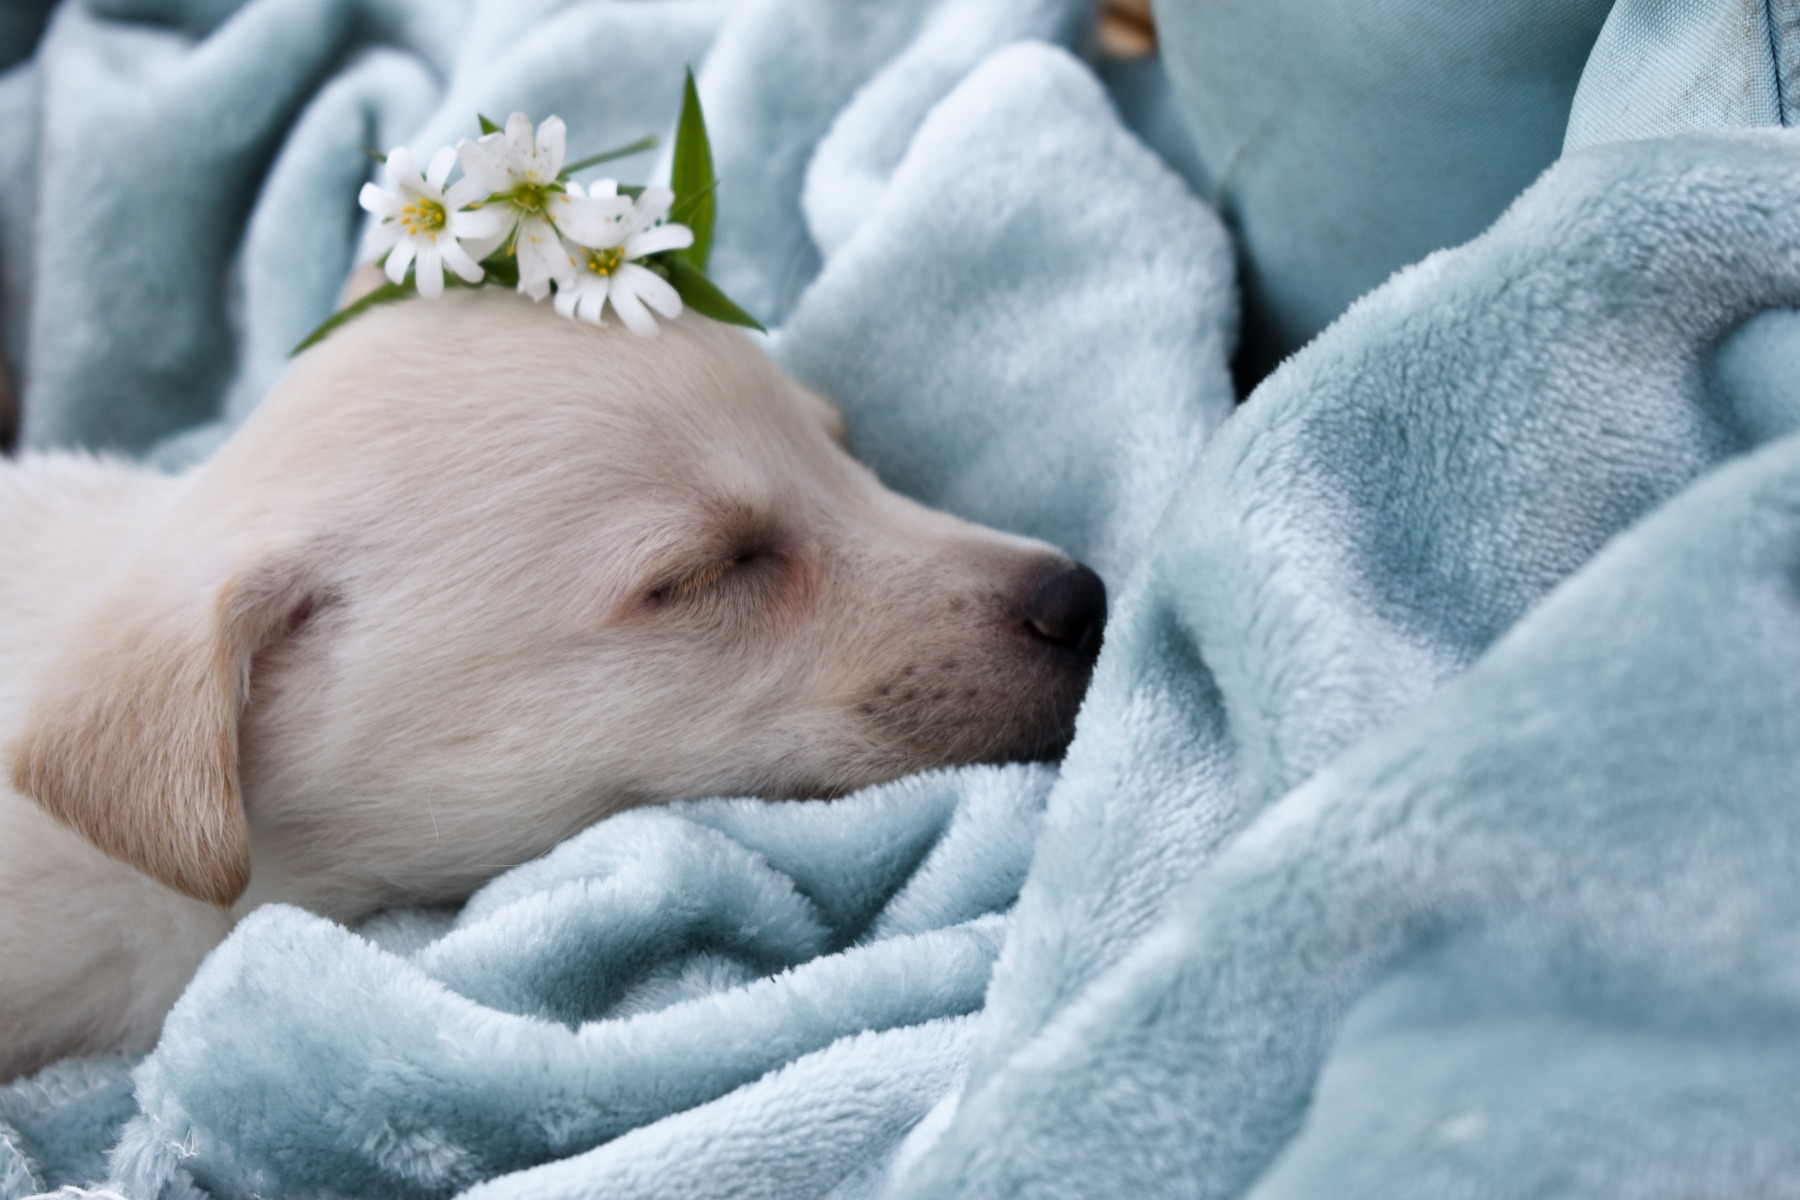 White dog sleeping on blue blanket with flowers on its head